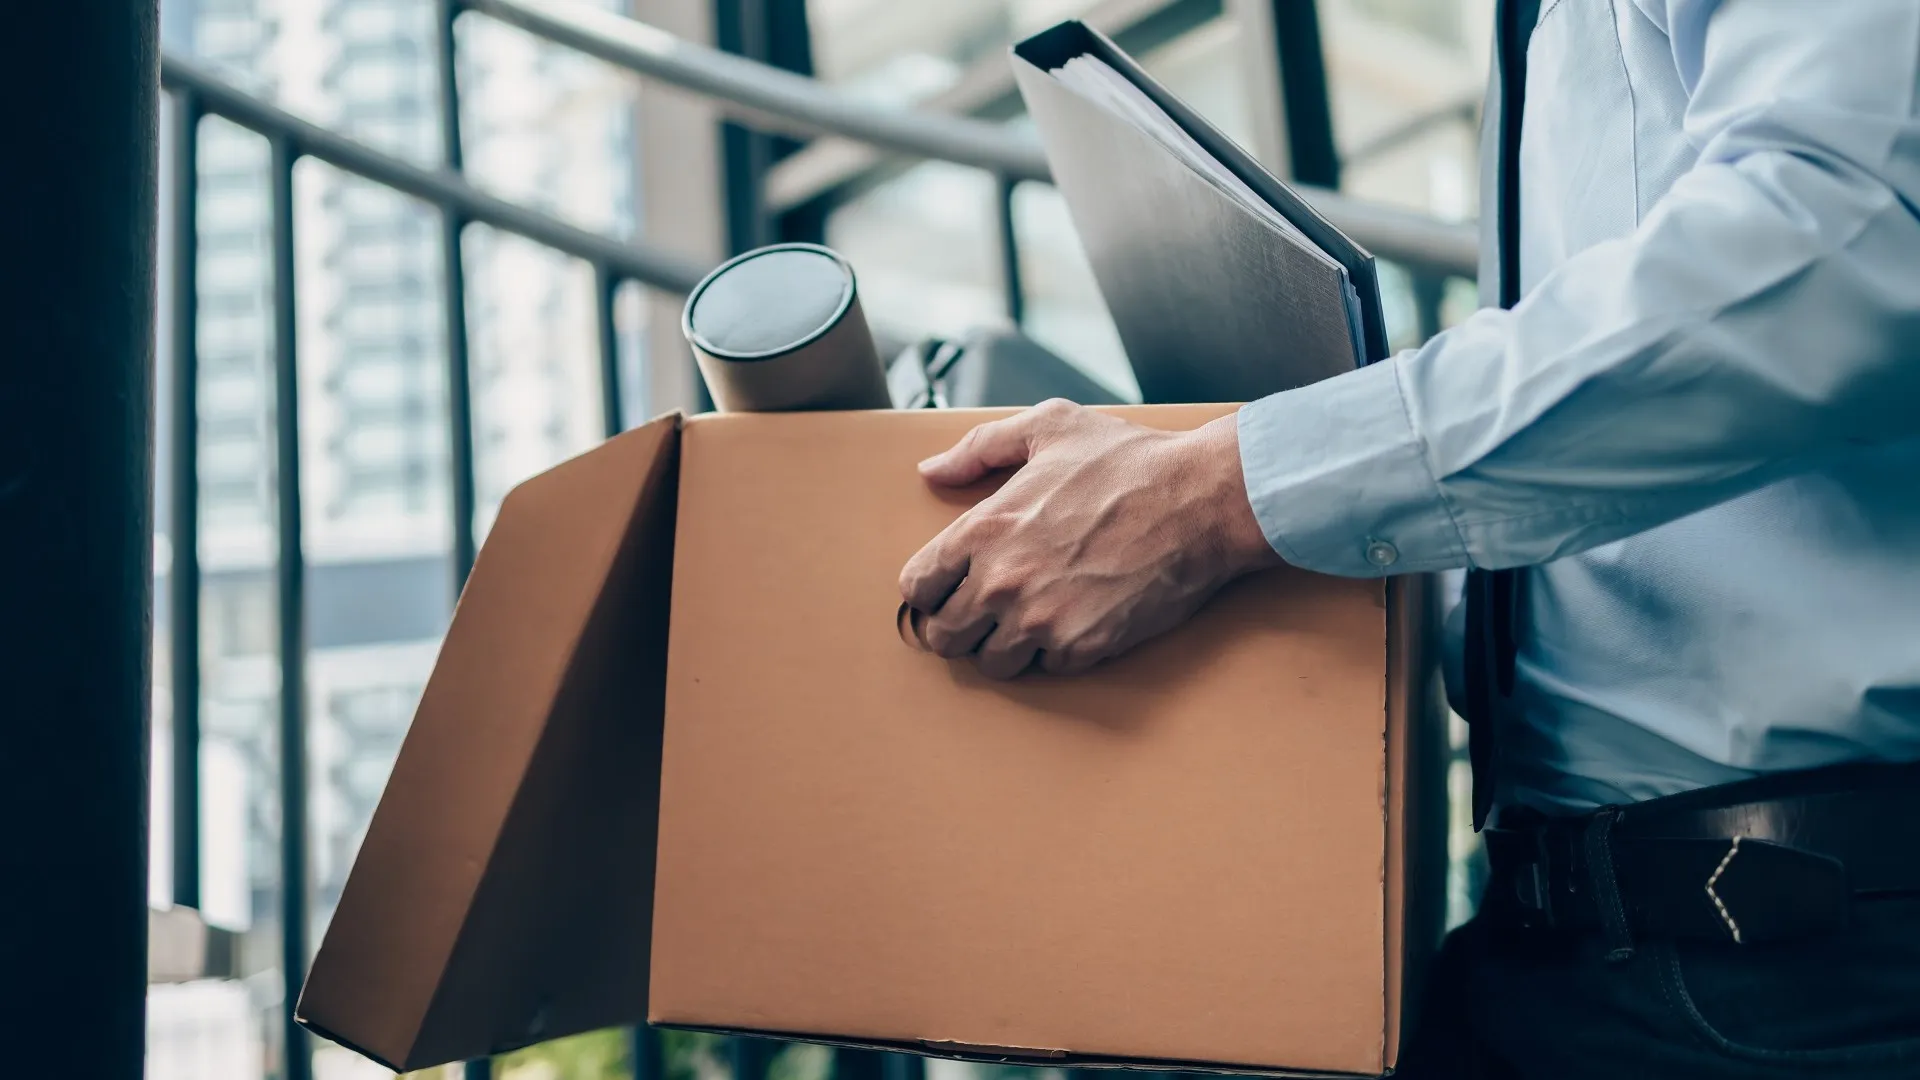 Unemployed hold cardboard box and laptop bag, dossier and drawing tube in box. Quitting a job, businessman fired or leave a job concept. stock photo